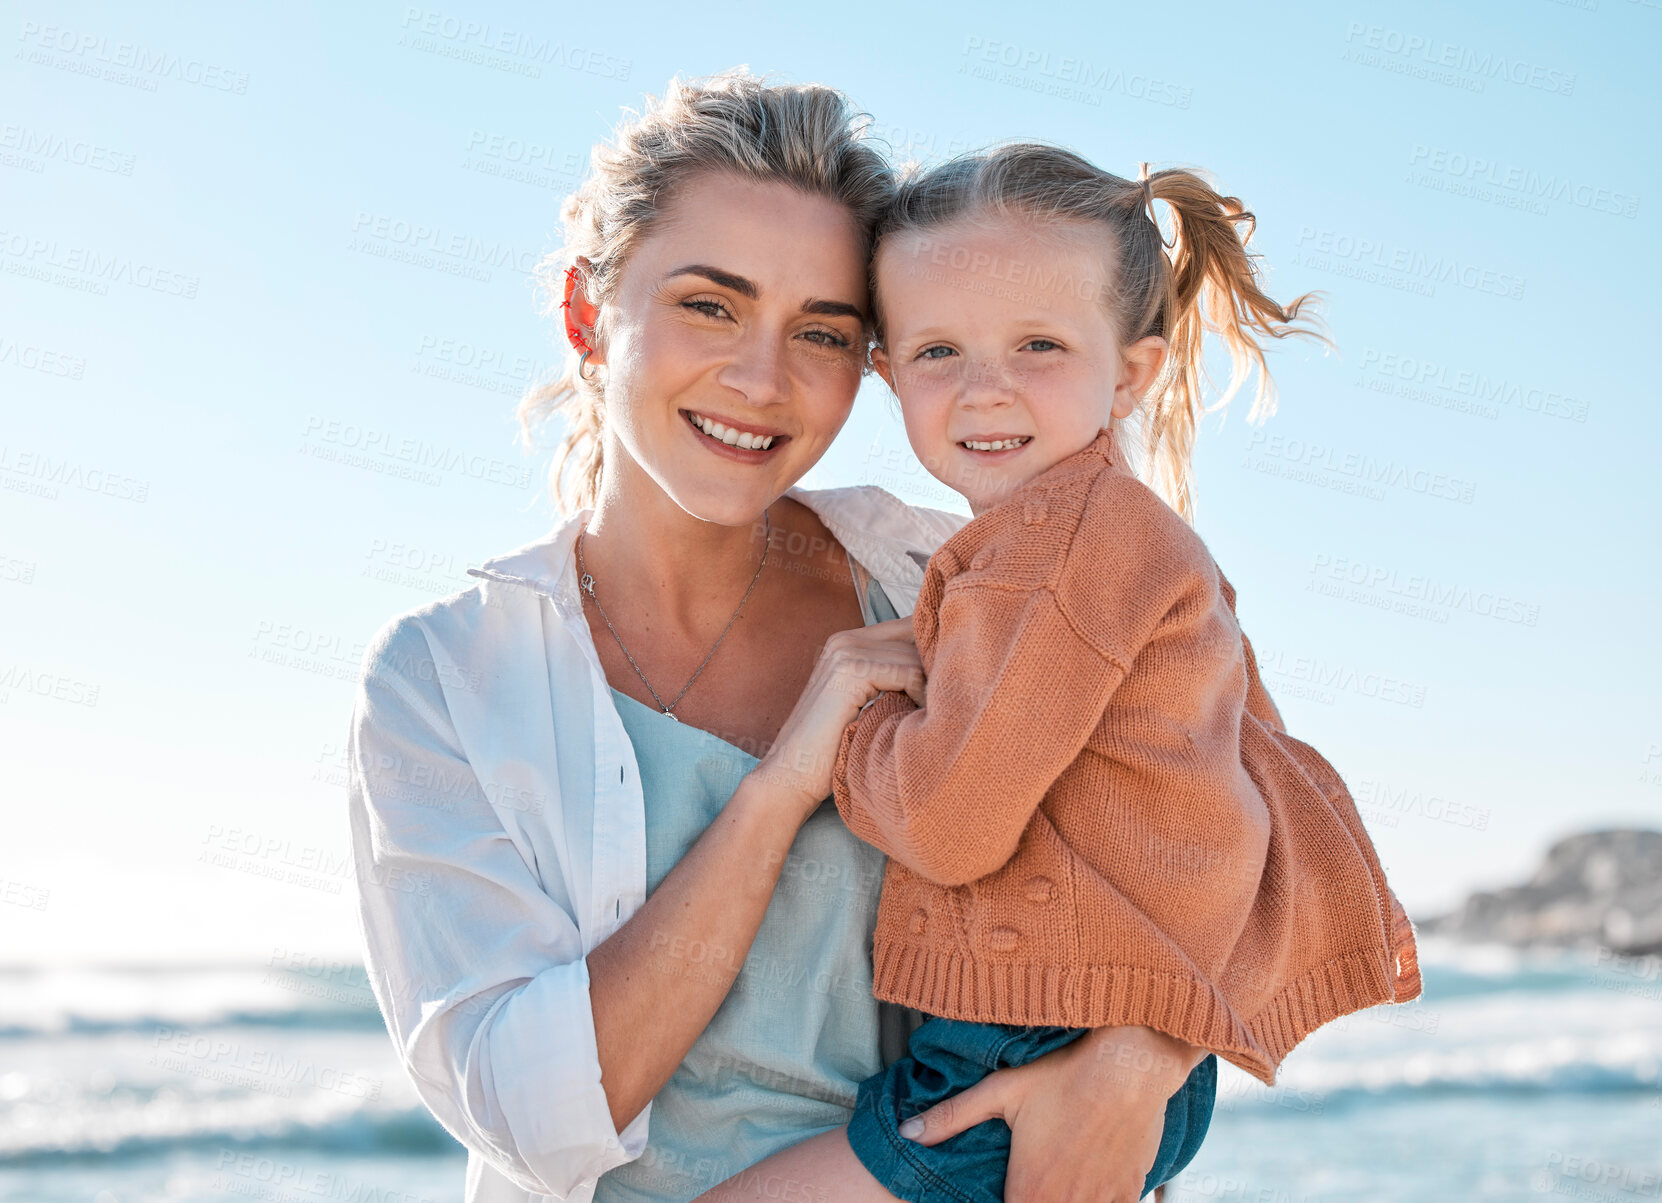 Buy stock photo Portrait of happy caucasian mother holding cheerful daughter while having fun in the sun at beach. Smiling woman carrying carefree girl while bonding outside. Loving mom enjoy quality time with kid